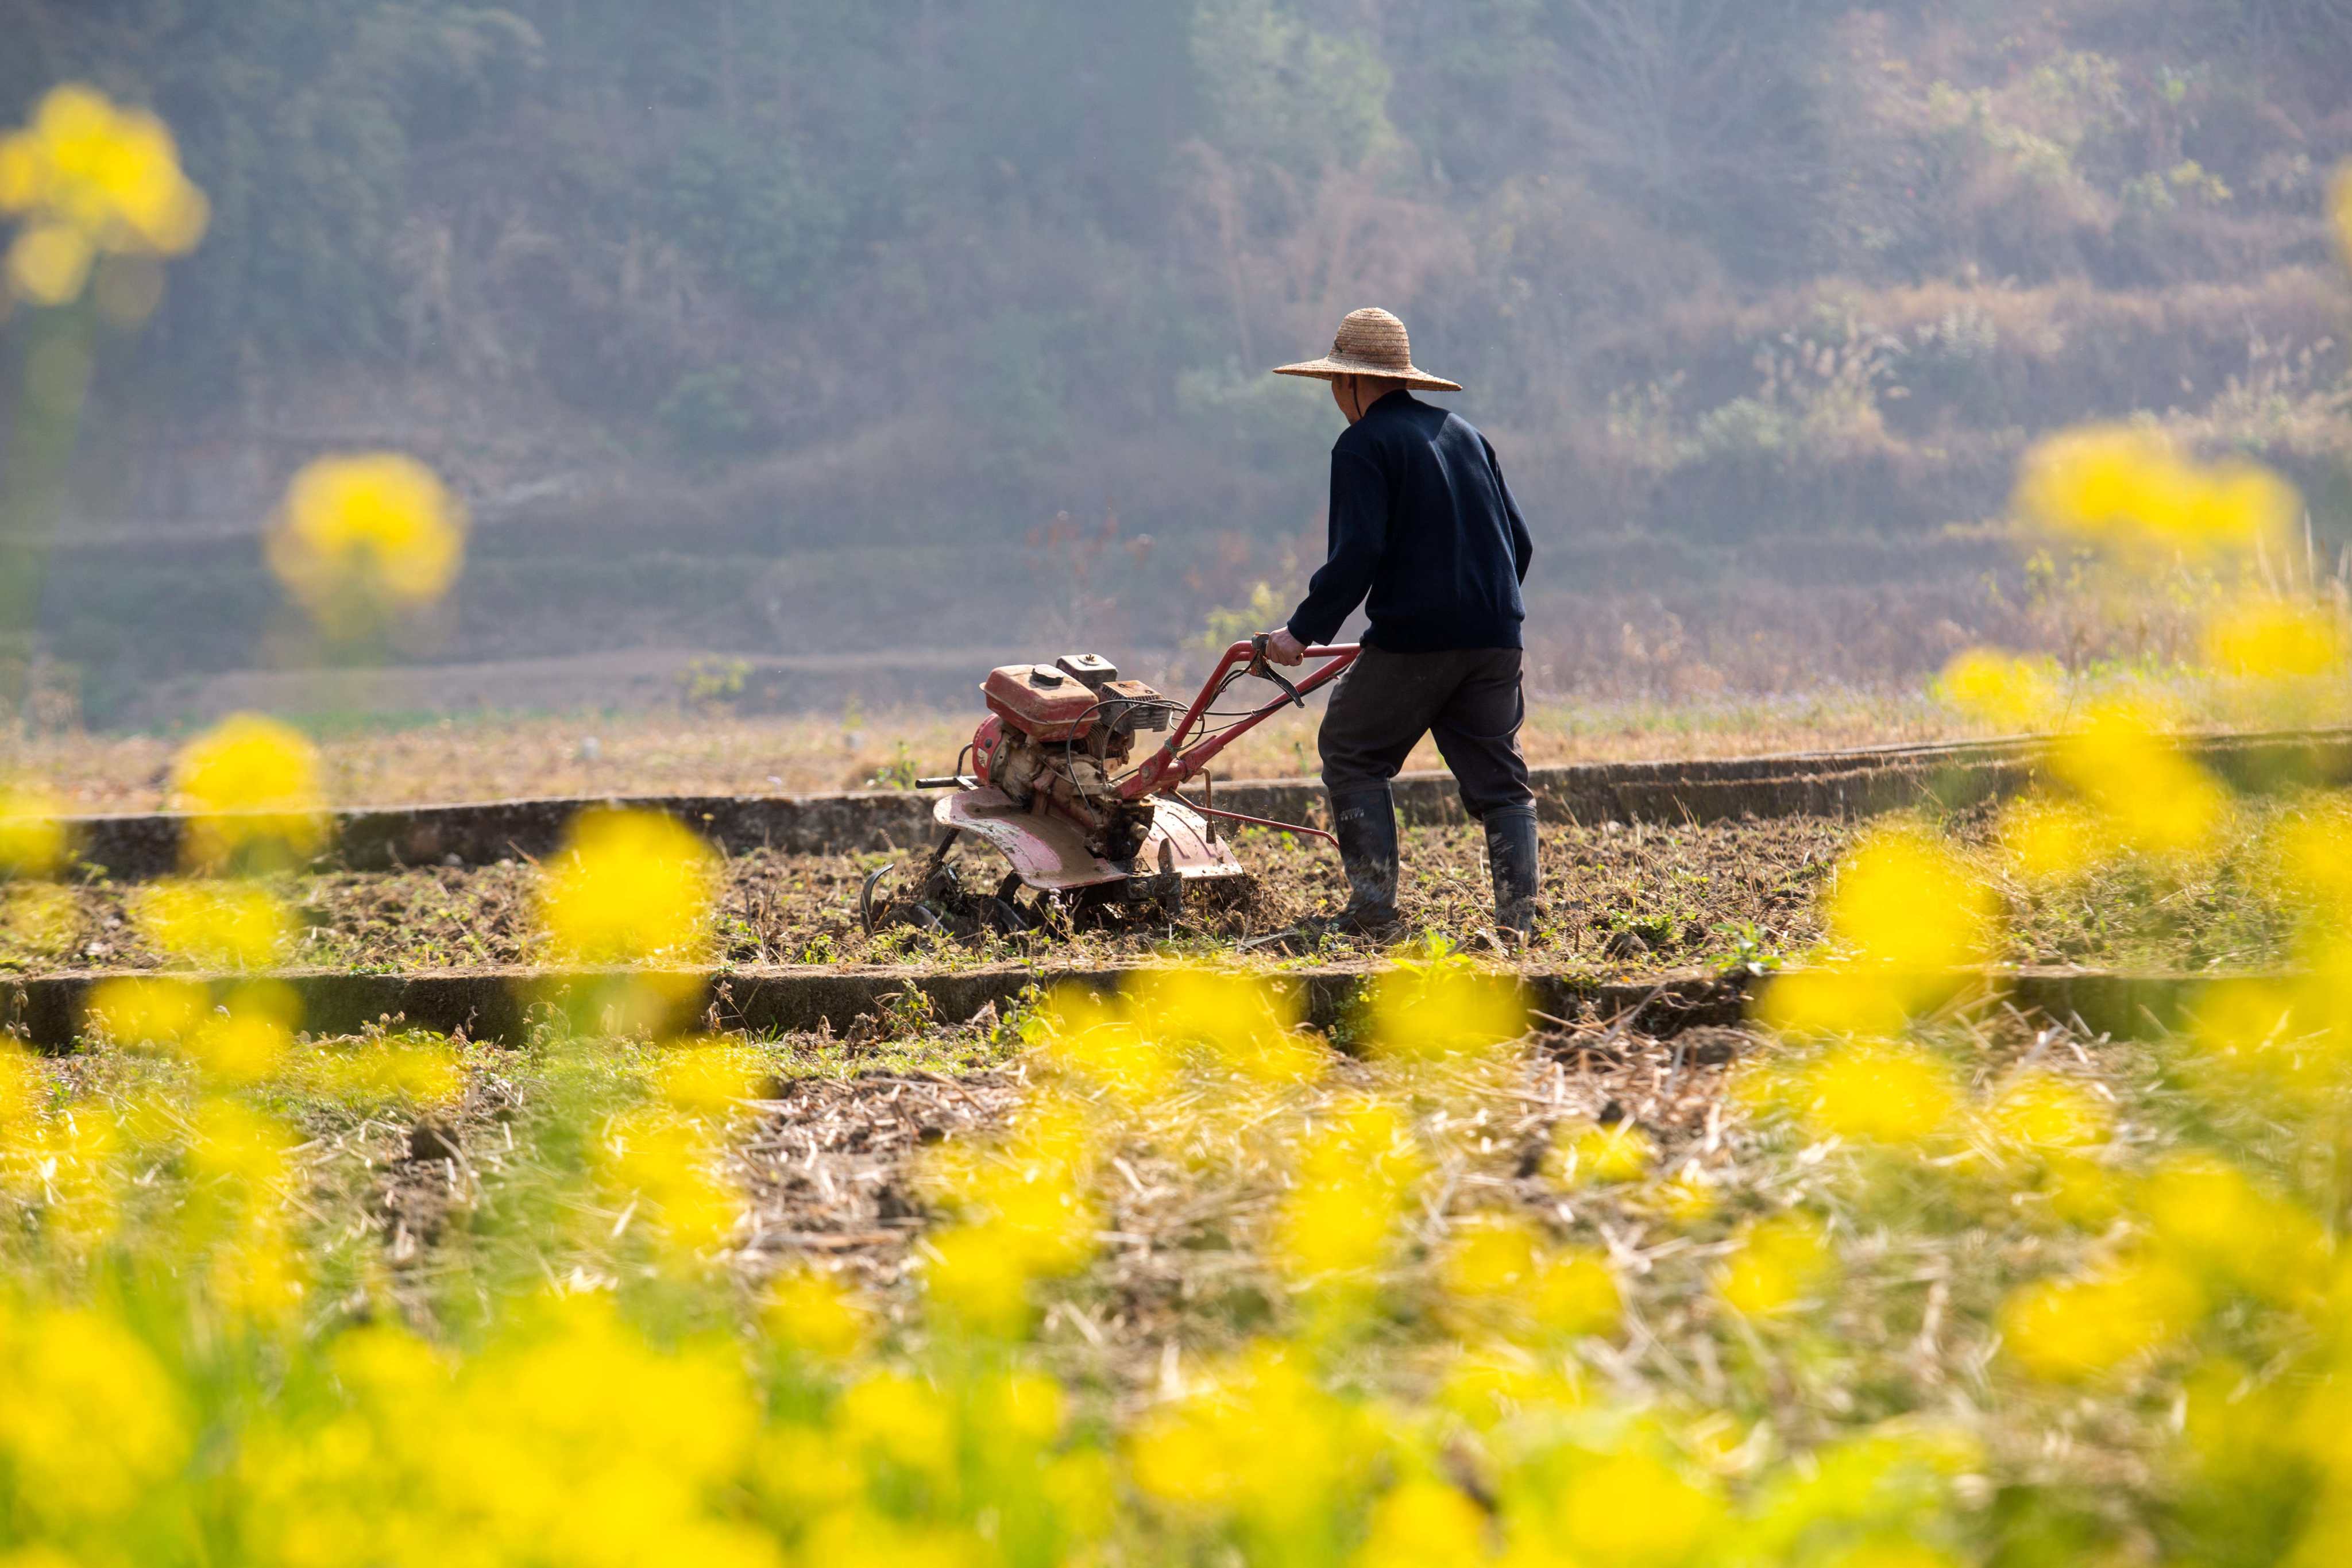 Beijing has laid out its vision of turning China into an agricultural superpower. Photo: Xinhua